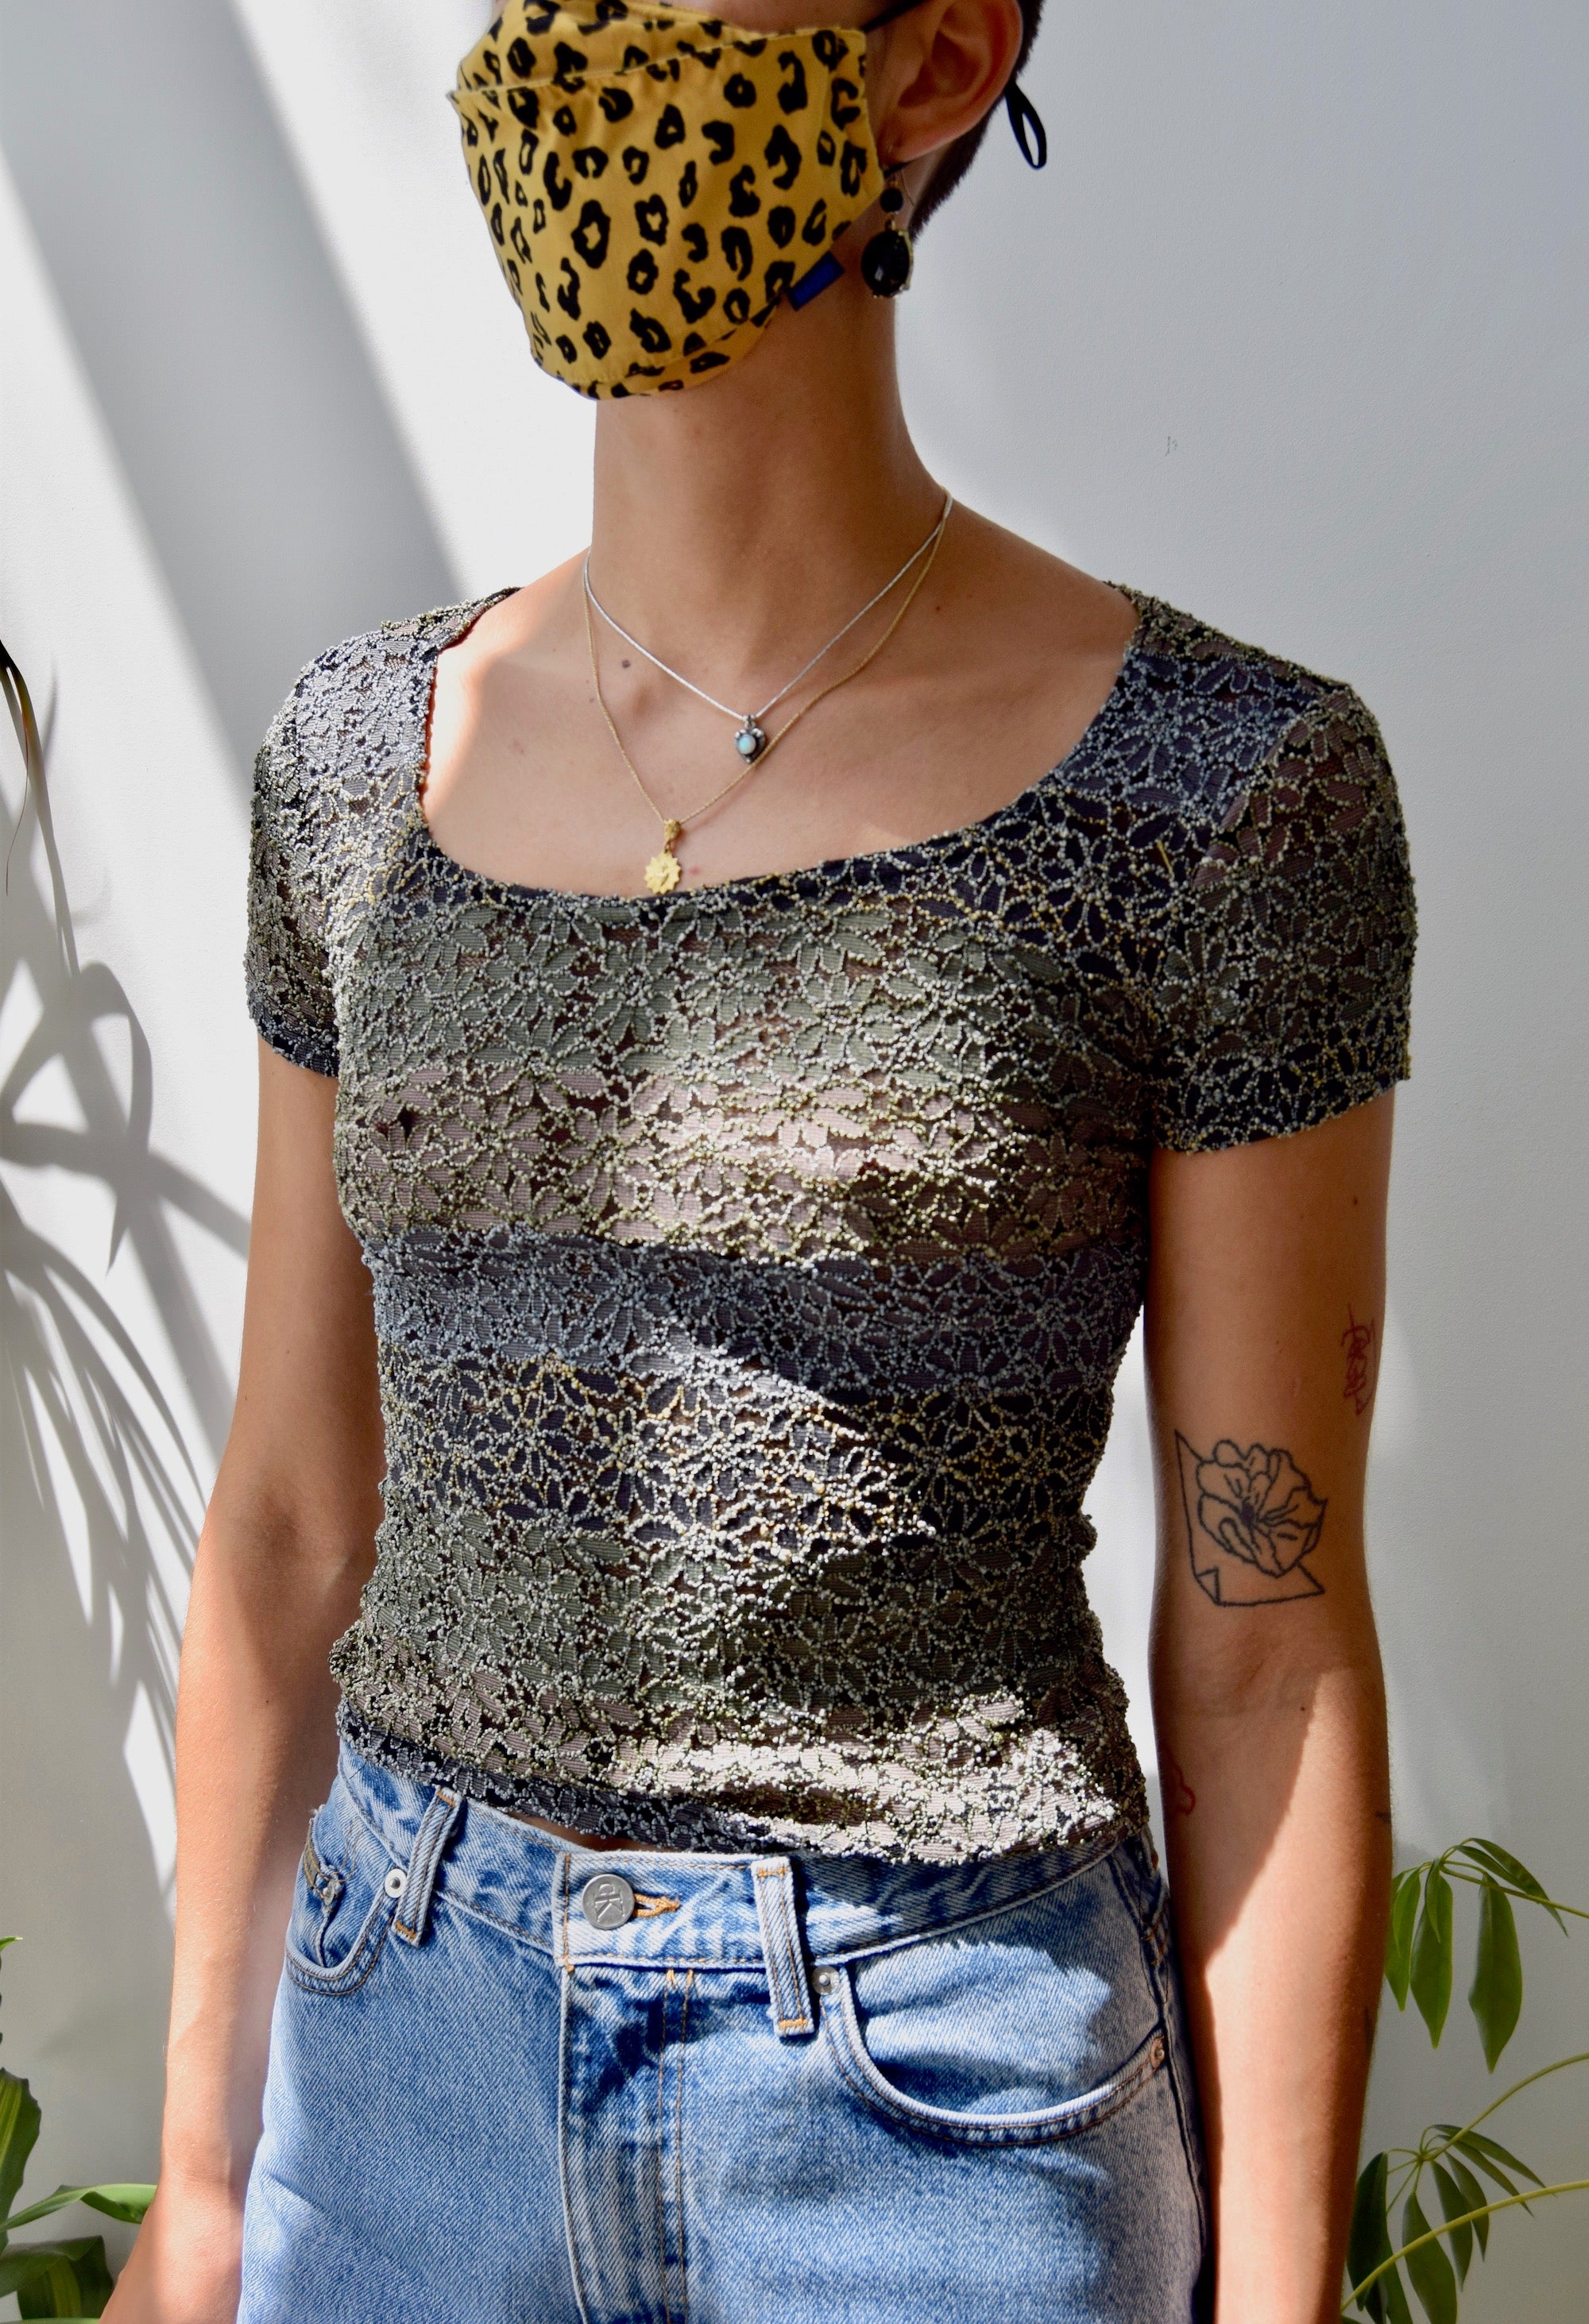 00s Floral Textured Top